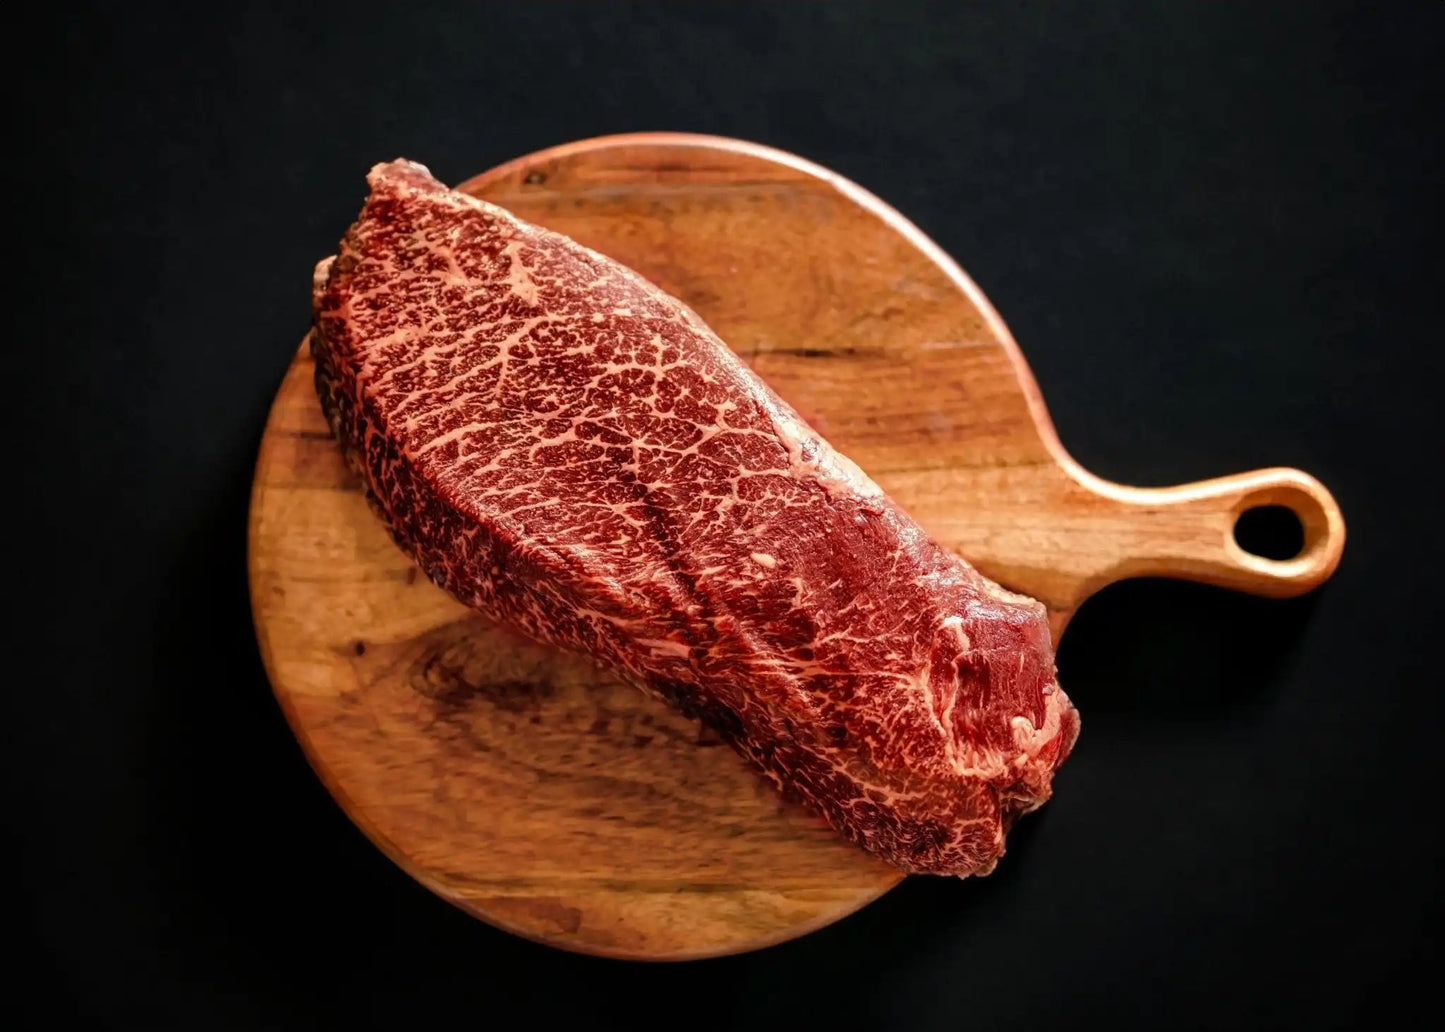 100% All-Natural Grass-Fed Pasture-Raised Wagyu London Broil - The Hufeisen-Ranch (WYO Wagyu)